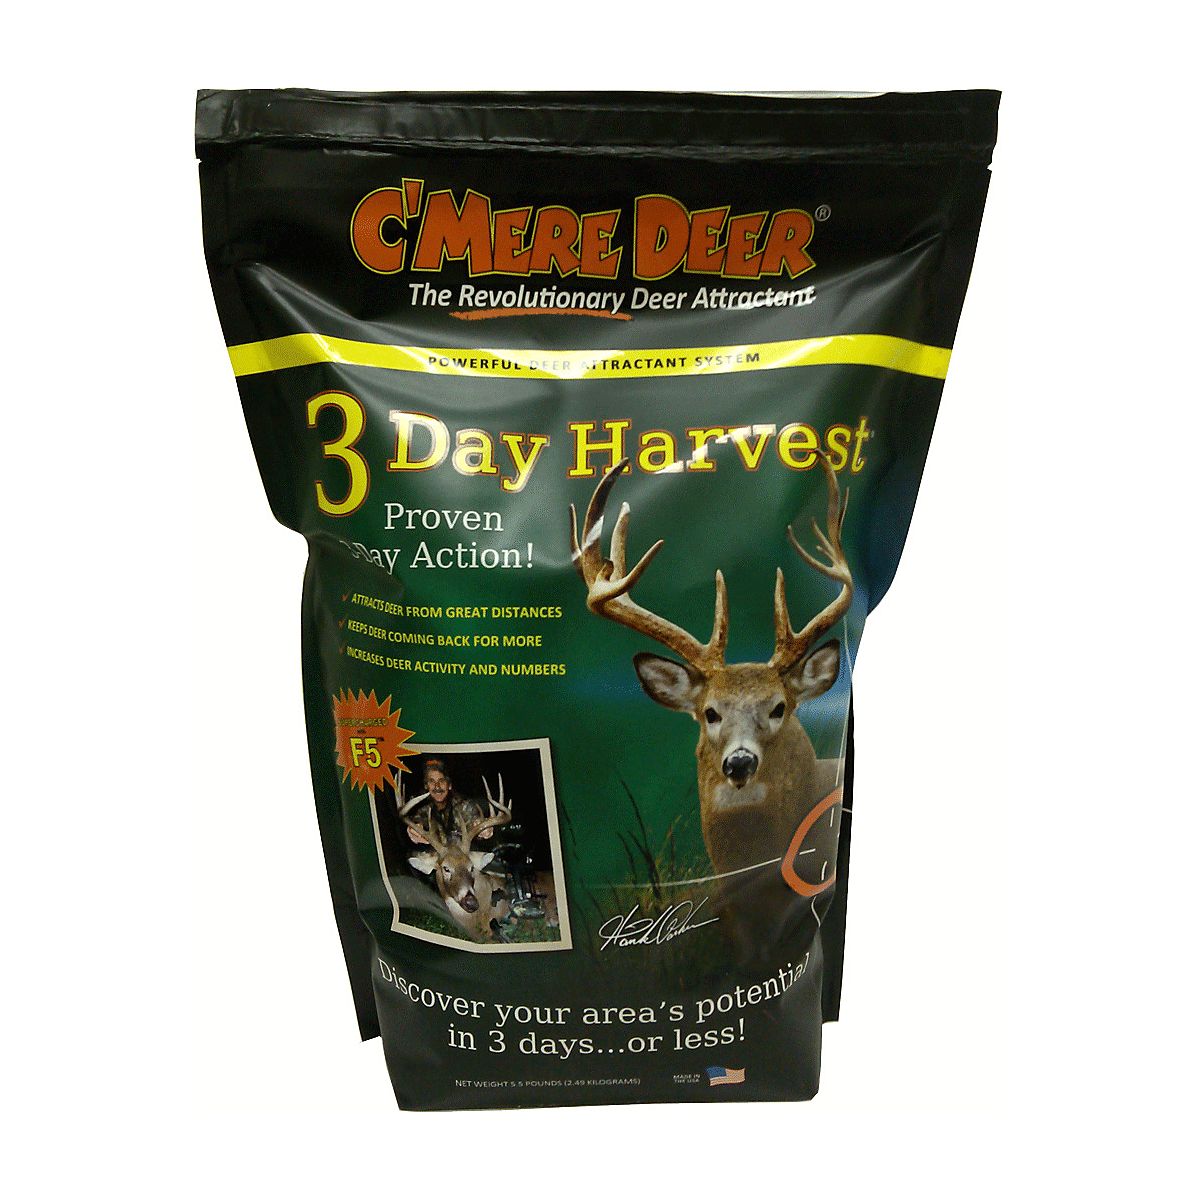 23 How To Use C’mere Deer 3 Day Harvest
 10/2022